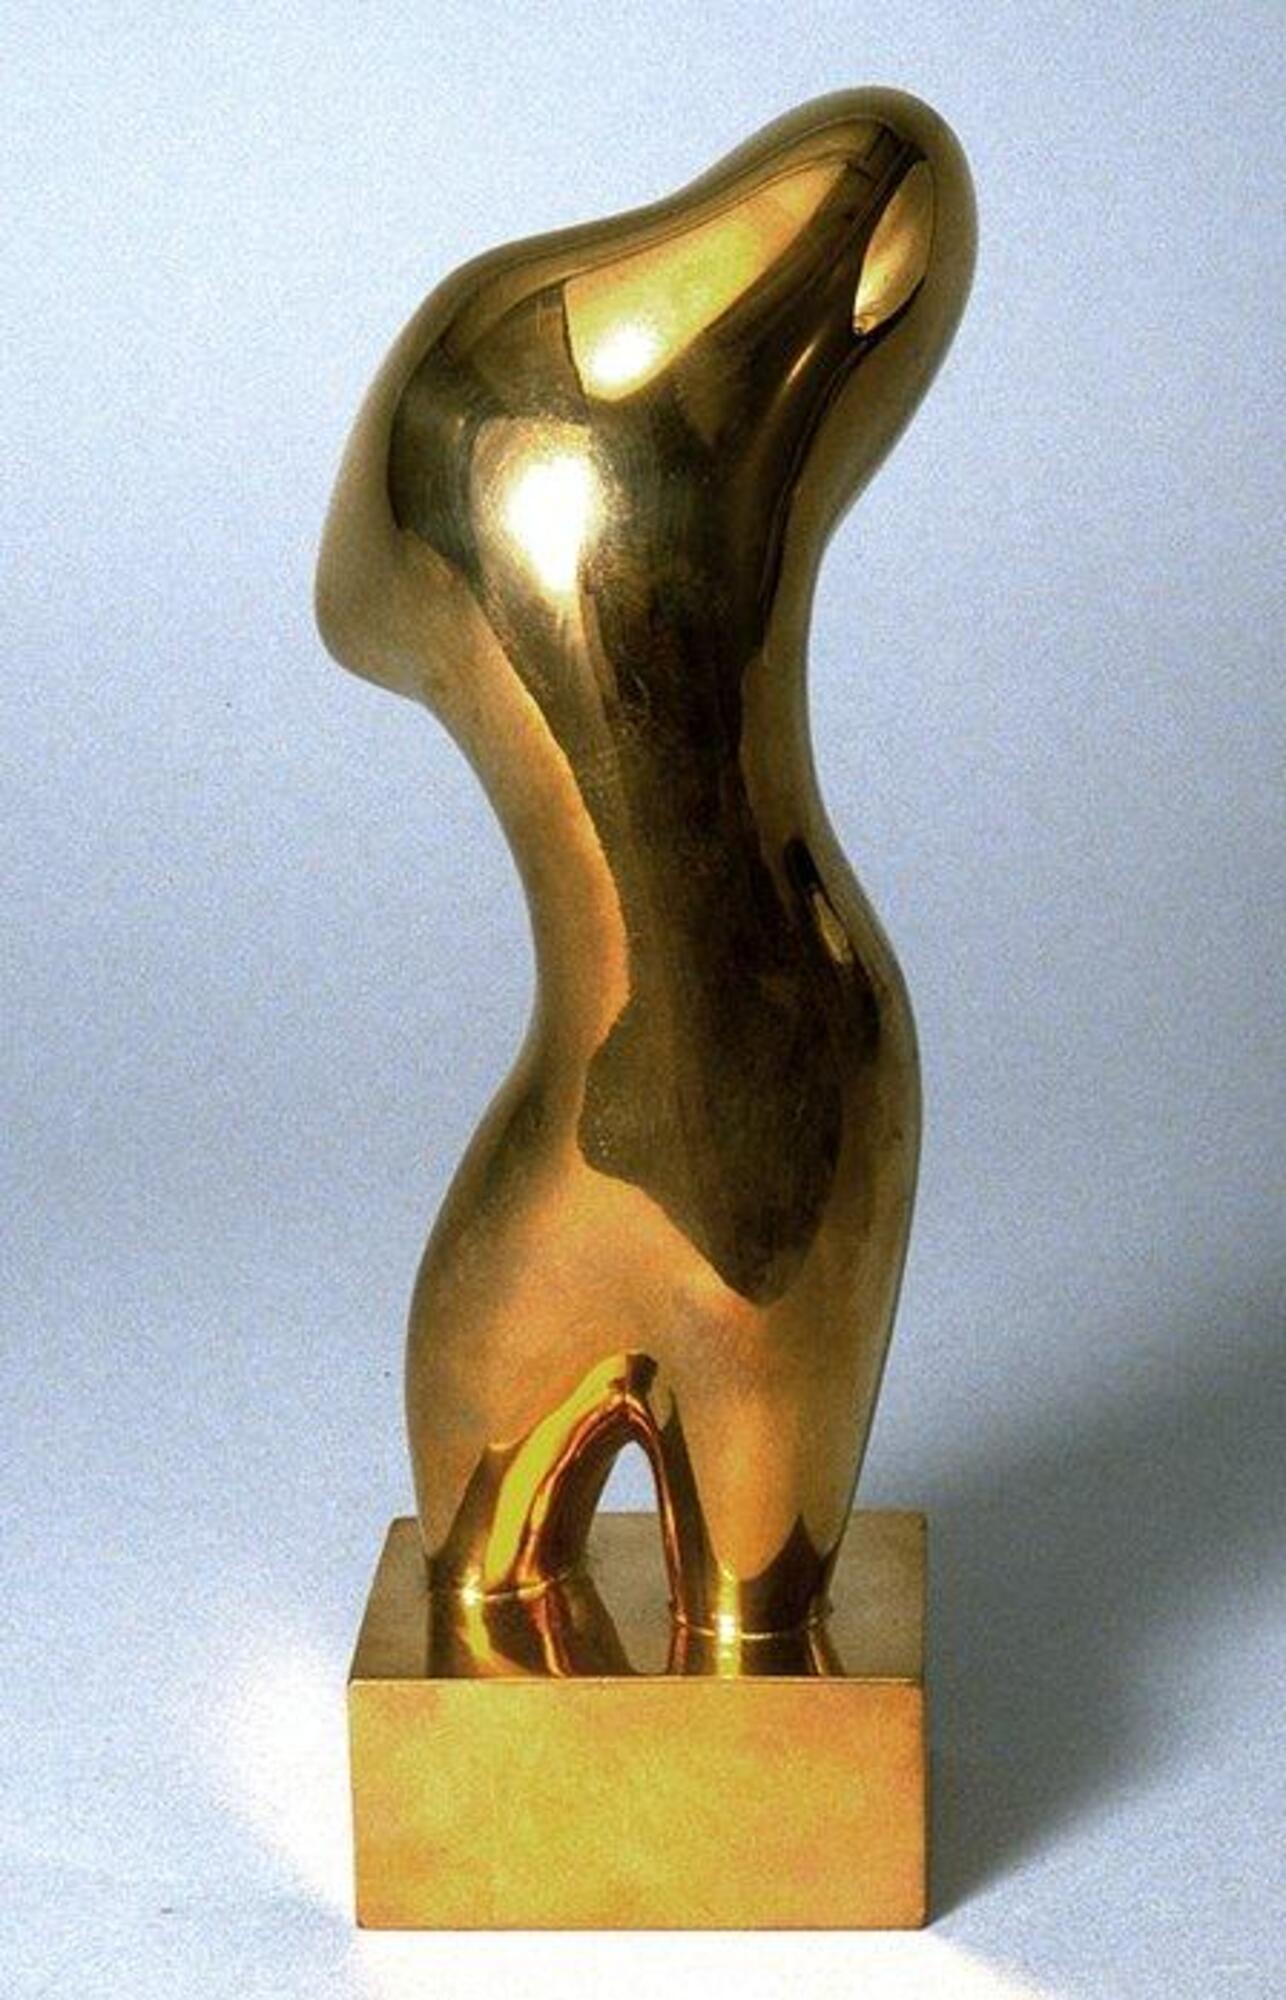 A small polished bronze sculpture of a biomorphic form rising gracefully from a small base. Where it contacts the base, the form stands on two leg-like structures. The form rises from there, narrows, then opens up into a wider, more oblong shape at the top.